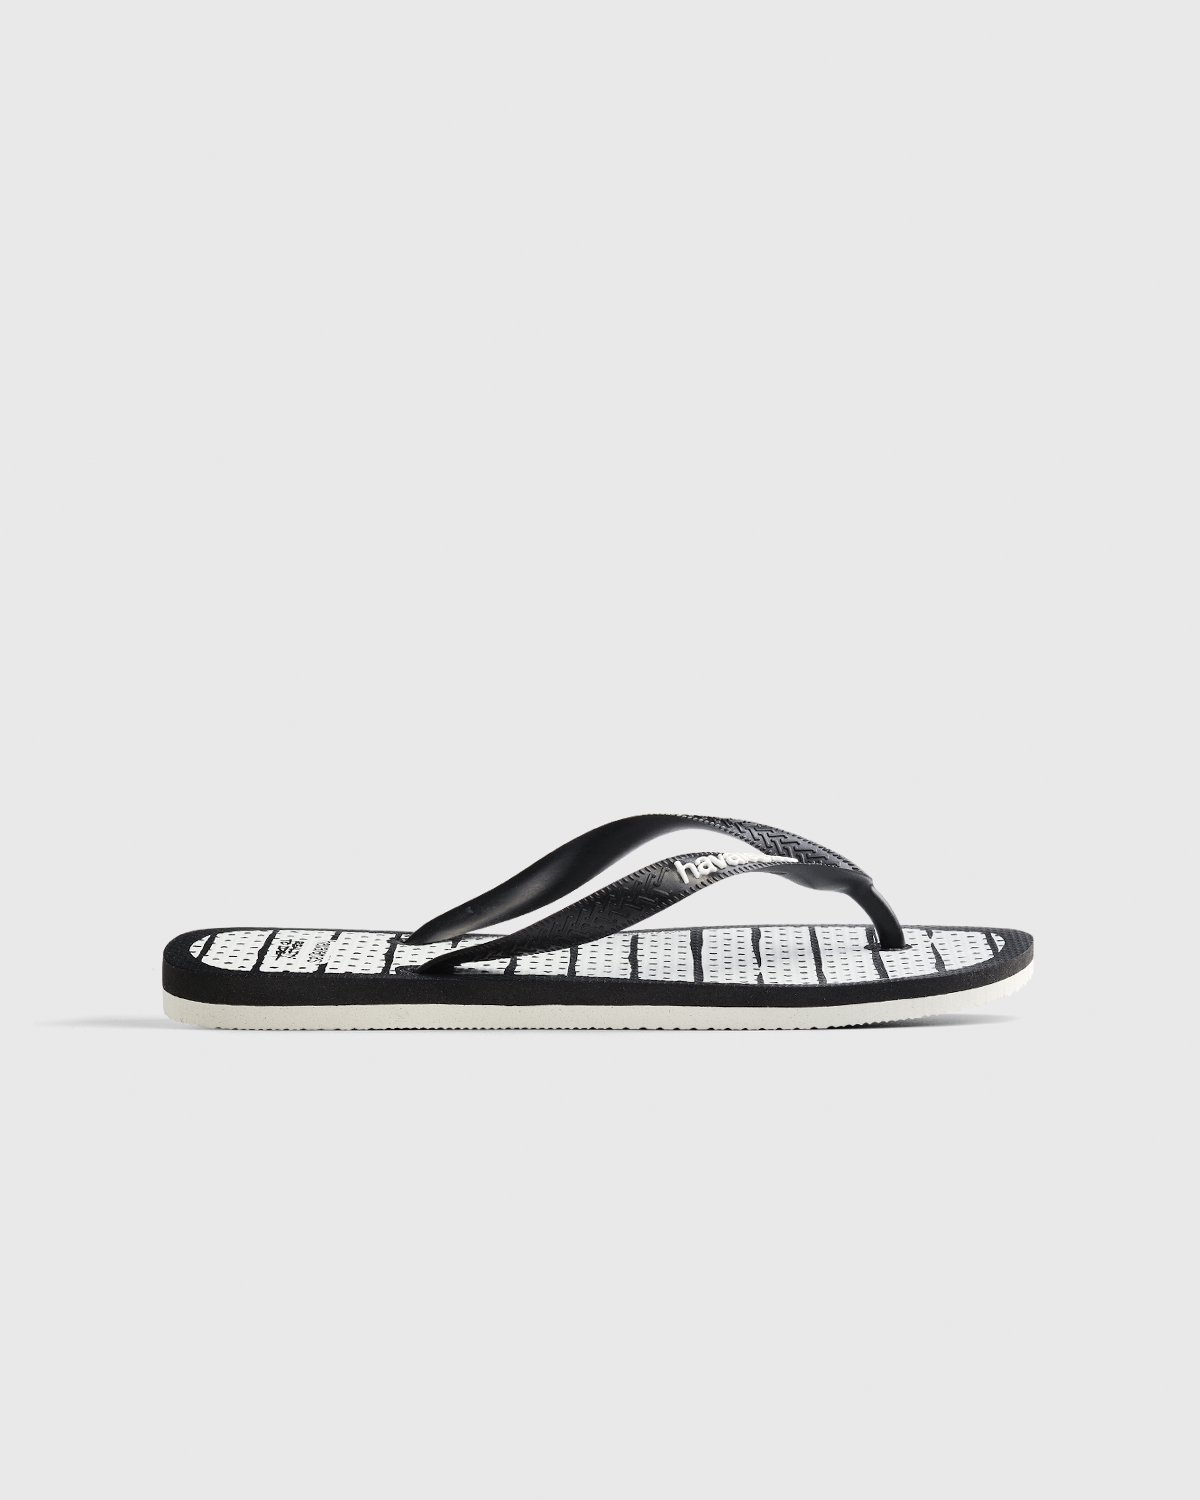 havaianas - Reality to Idea by Joshuas Vides Top White - Footwear - White - Image 1